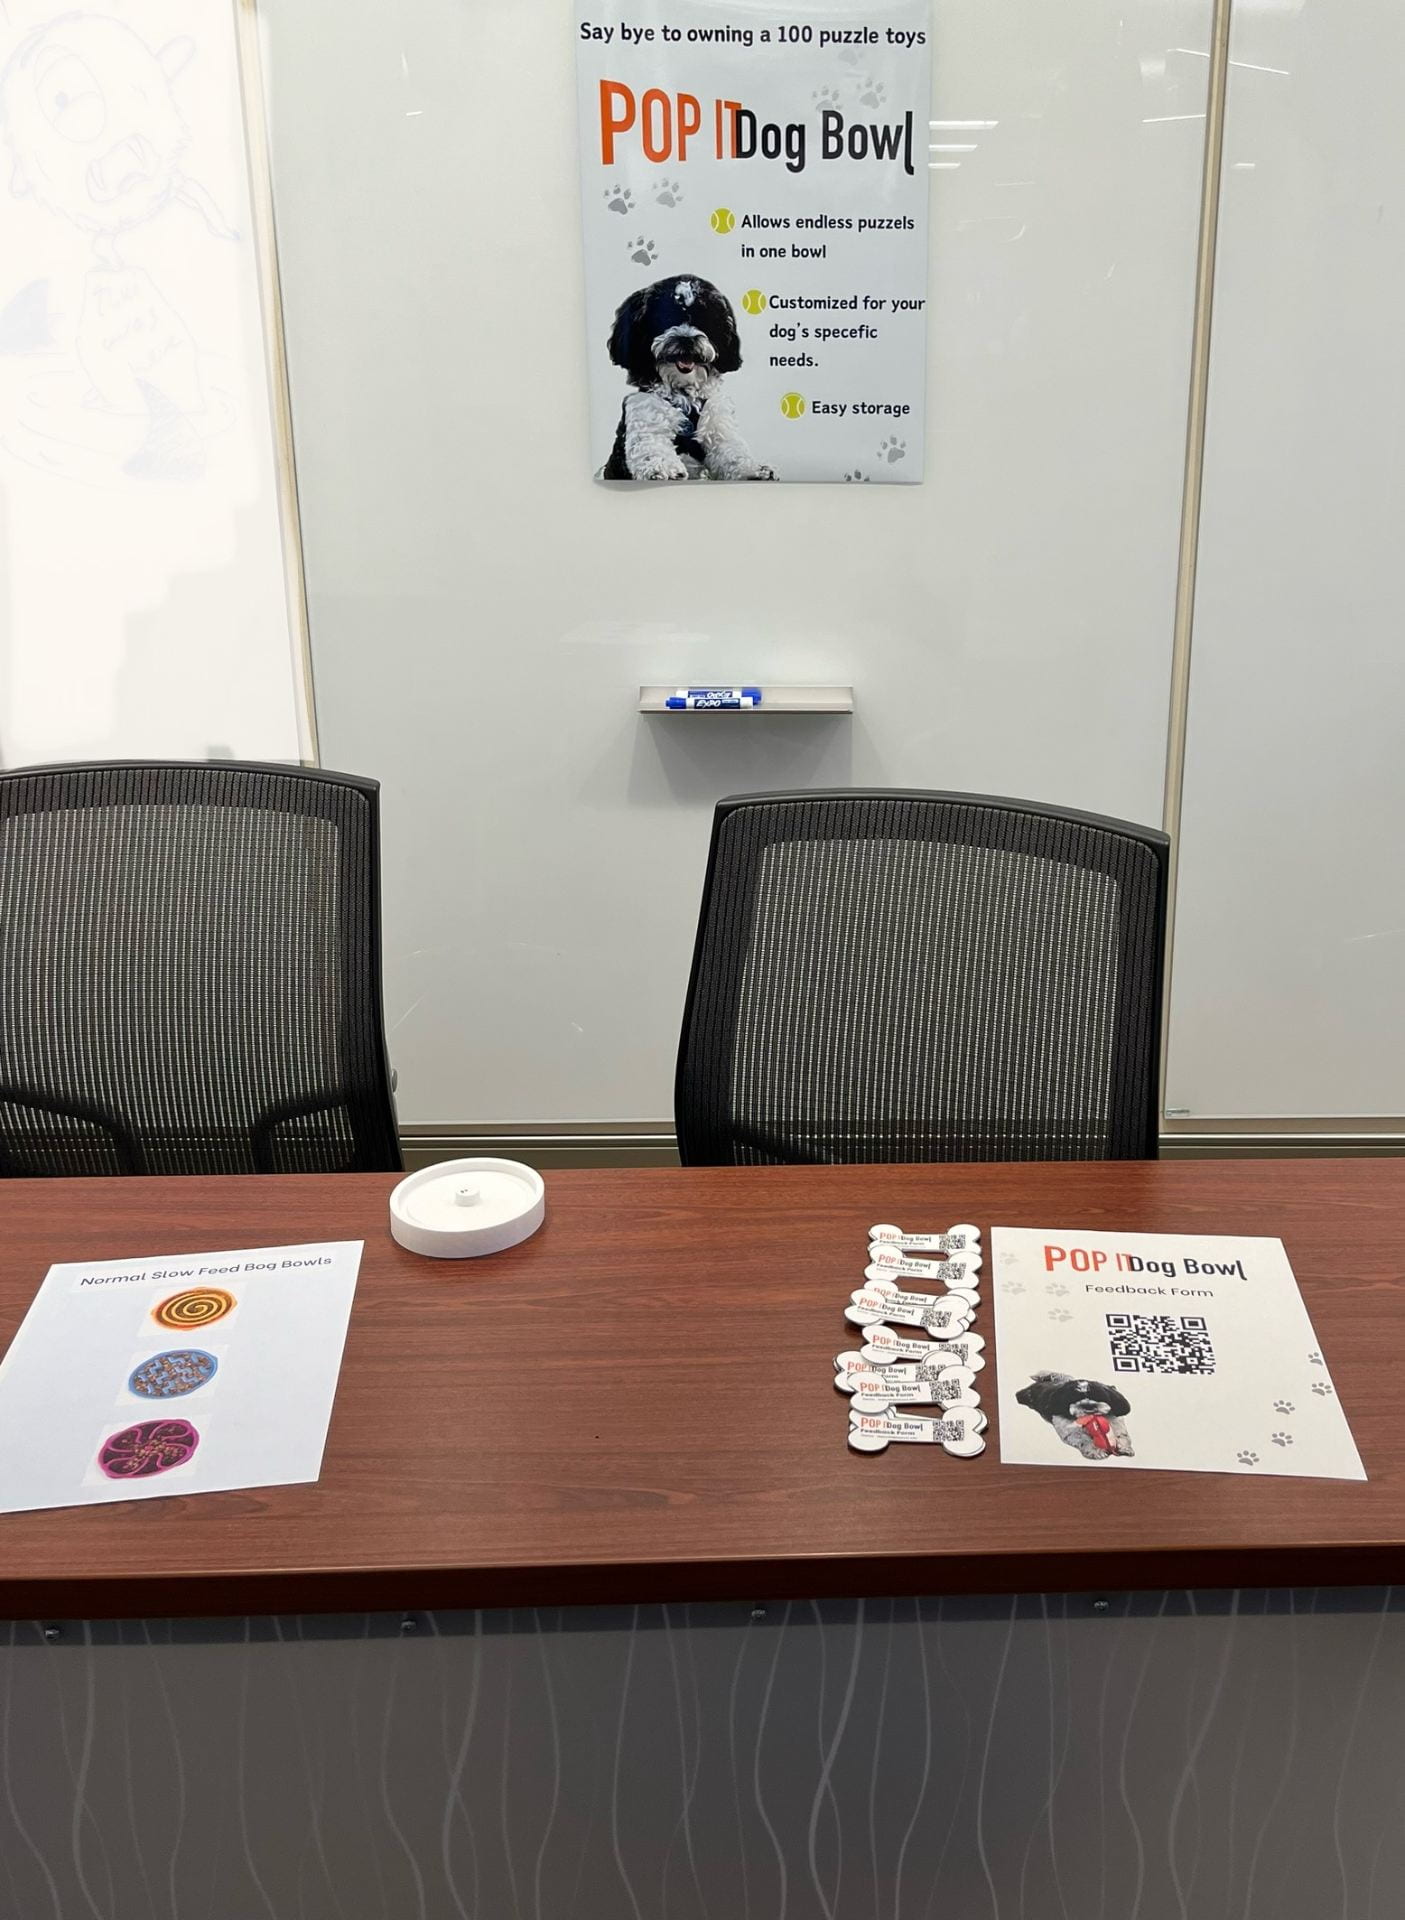 A poster hanging with the words “Popit Dog Bowl” in bold with a picture of a dog on it. The table has a flier and little paper dog bones with a QR code on it.